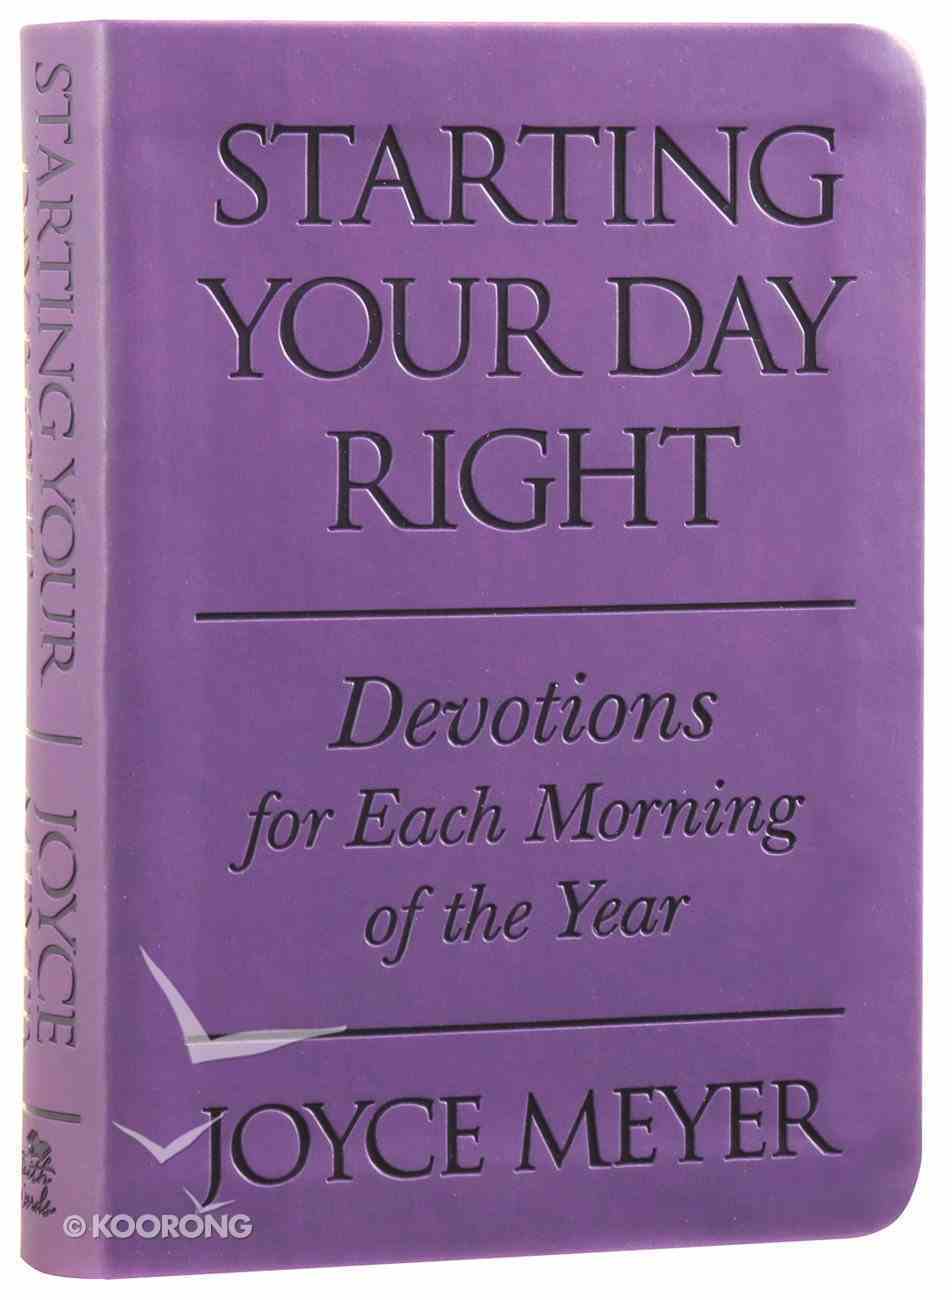 Starting Your Day Right: Devotions For Each Morning of the Year (Purple) Imitation Leather